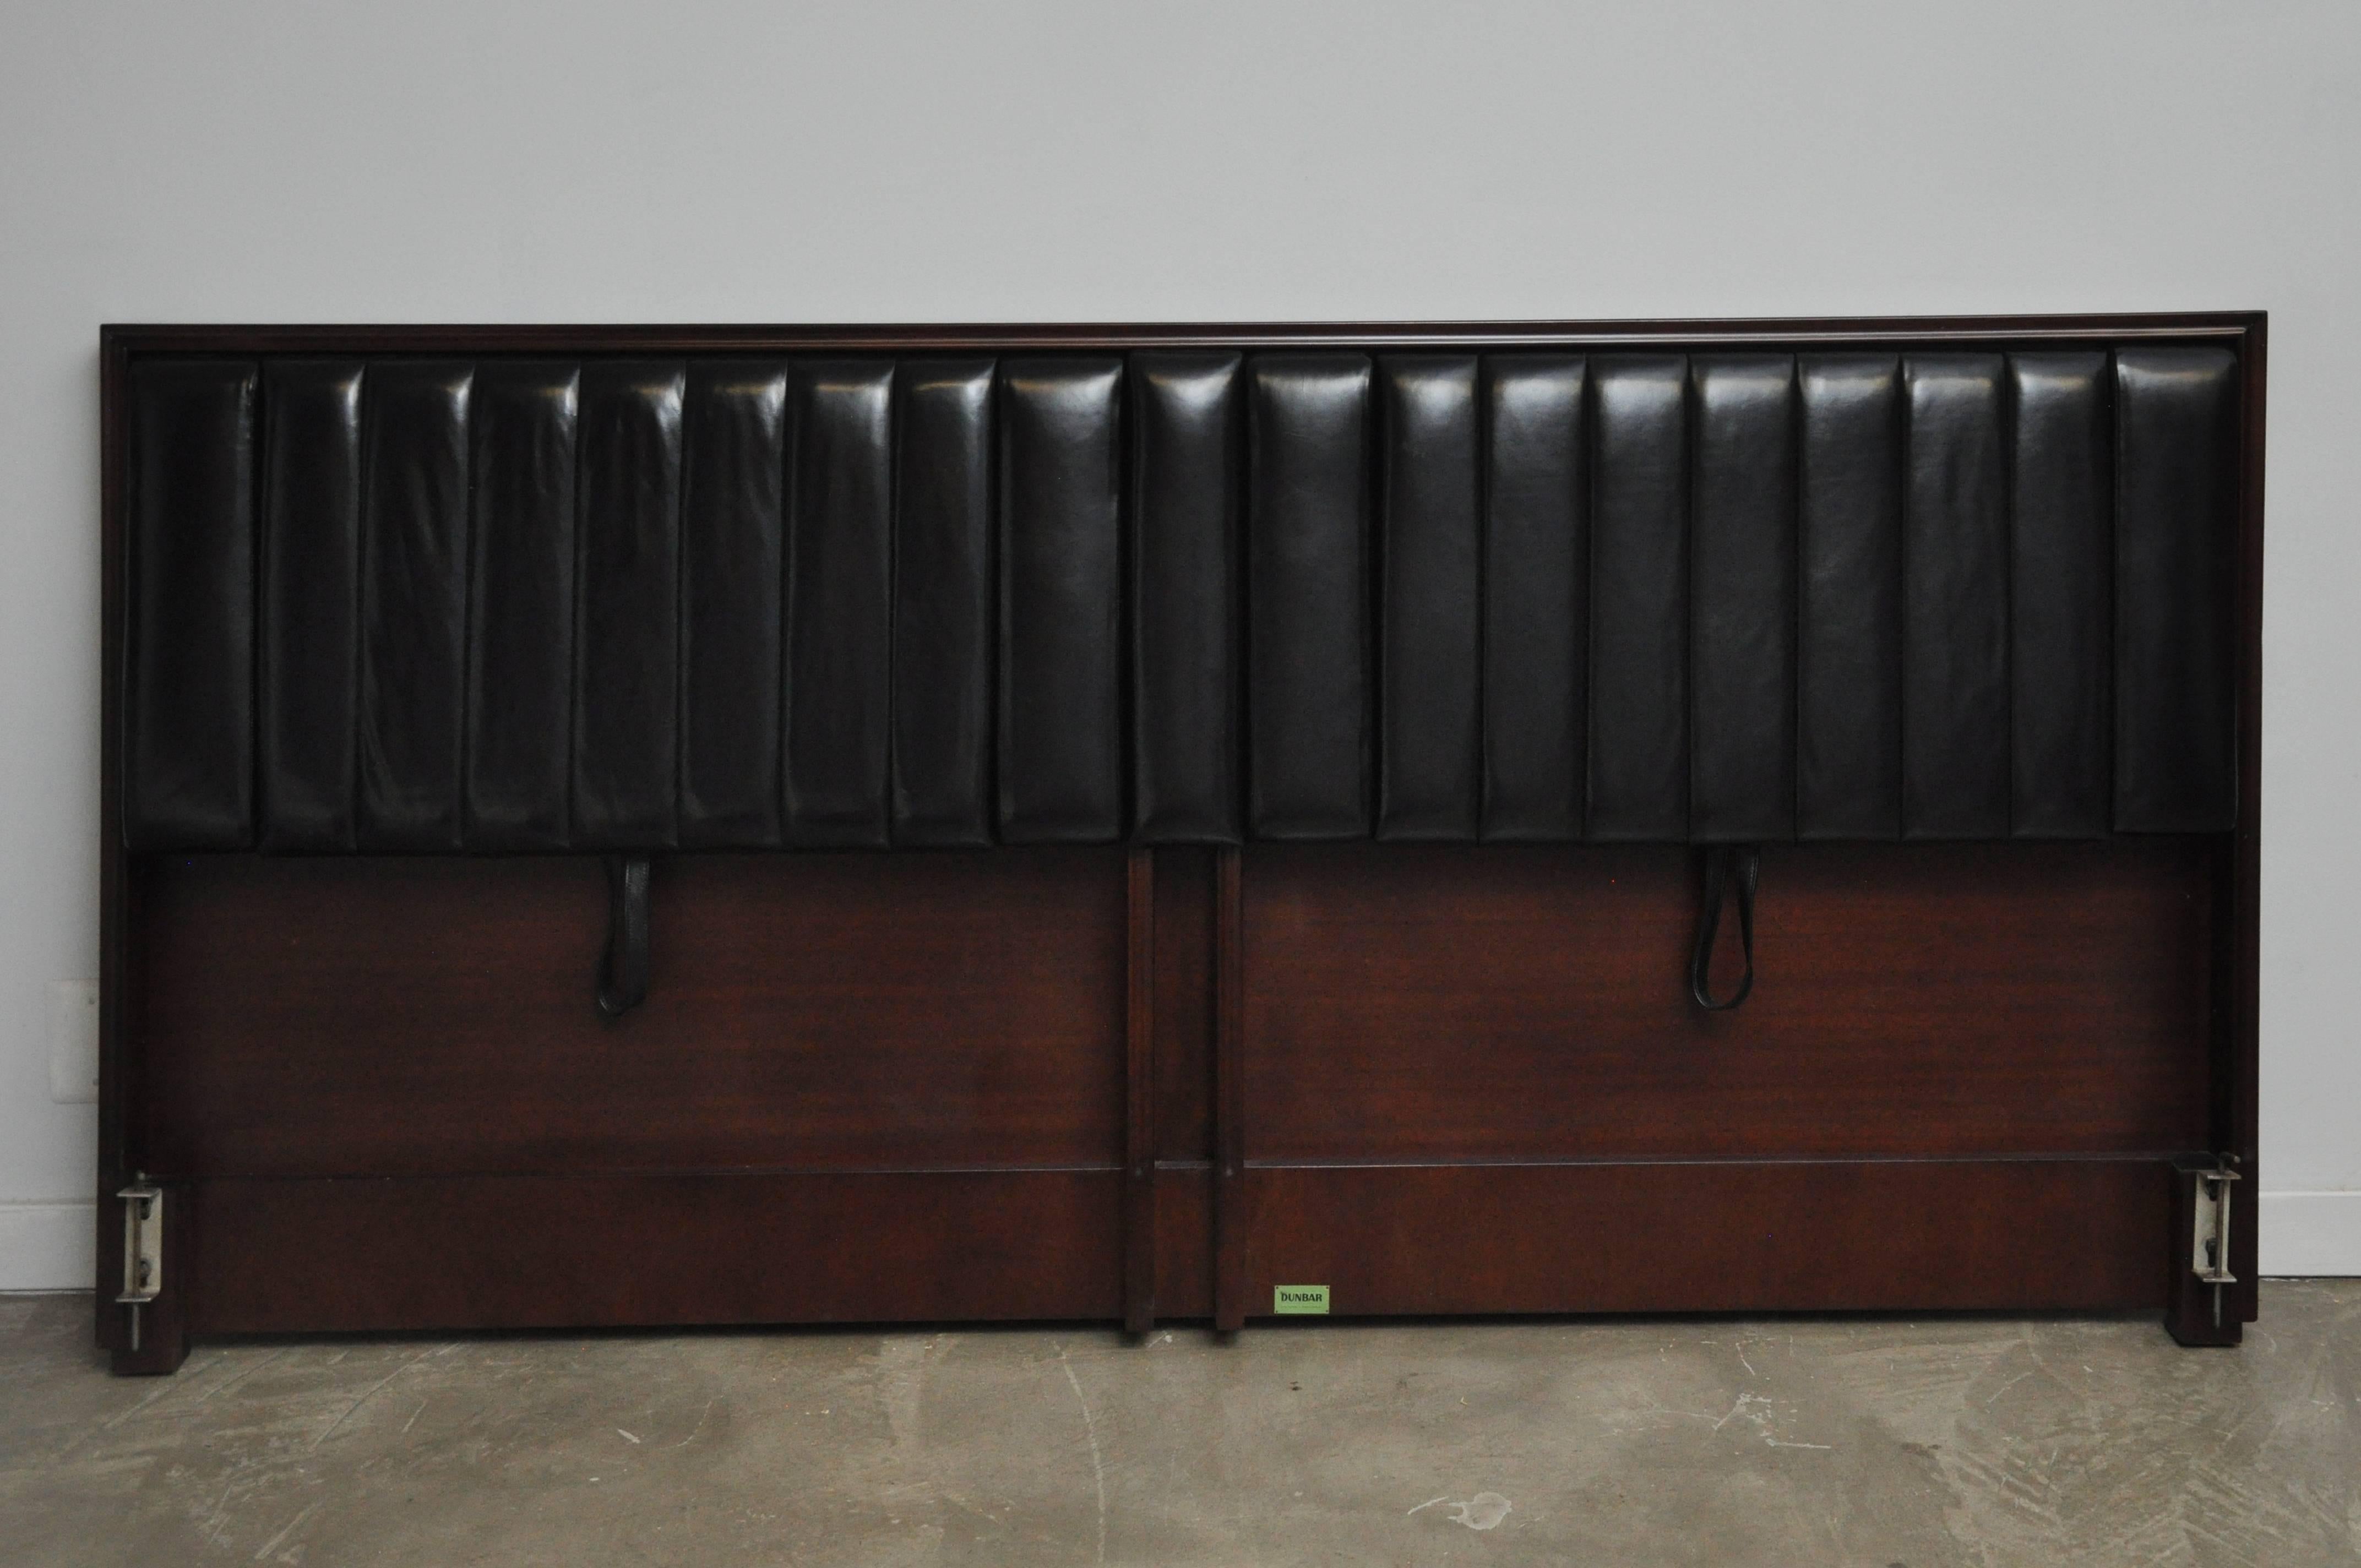 Adjustable king-size headboard by Edward Wormley for Dunbar. Model 4588, circa 1950s. Both sides have drop down arms and adjustable back. Restored mahogany frame in walnut finish with black leather upholstery.